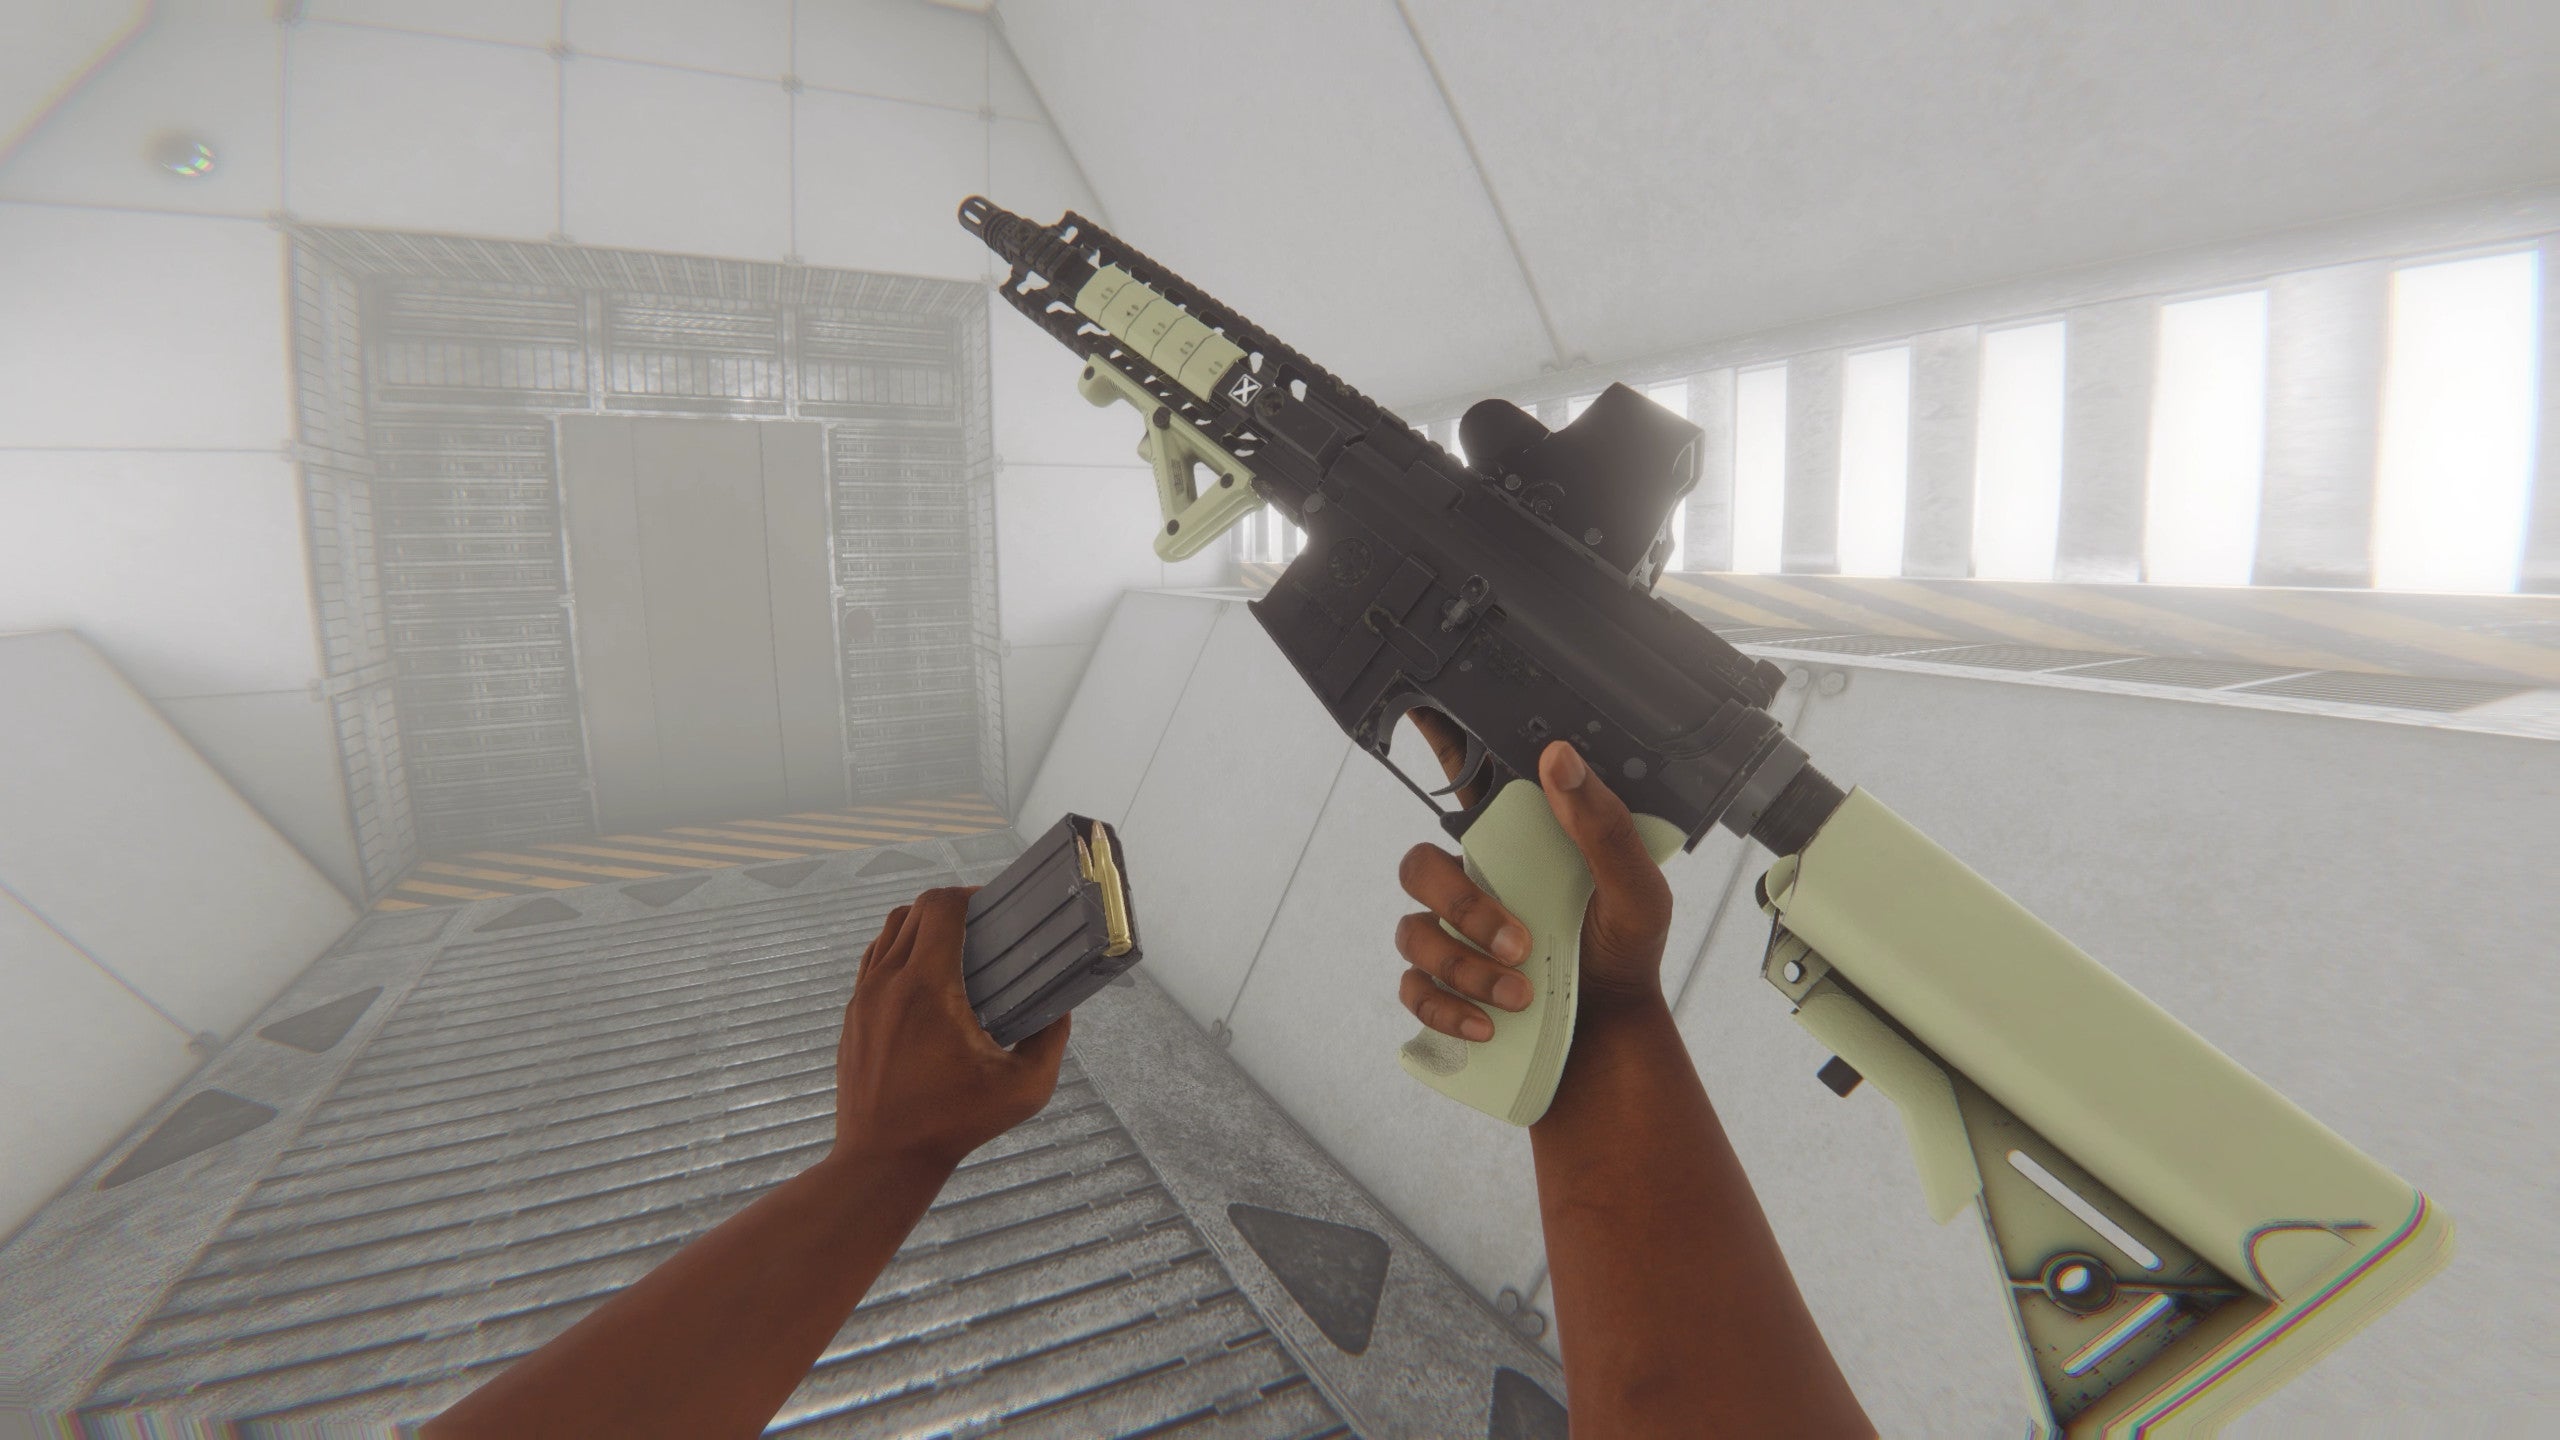 The player reloads an automatic rifle in Bonelab